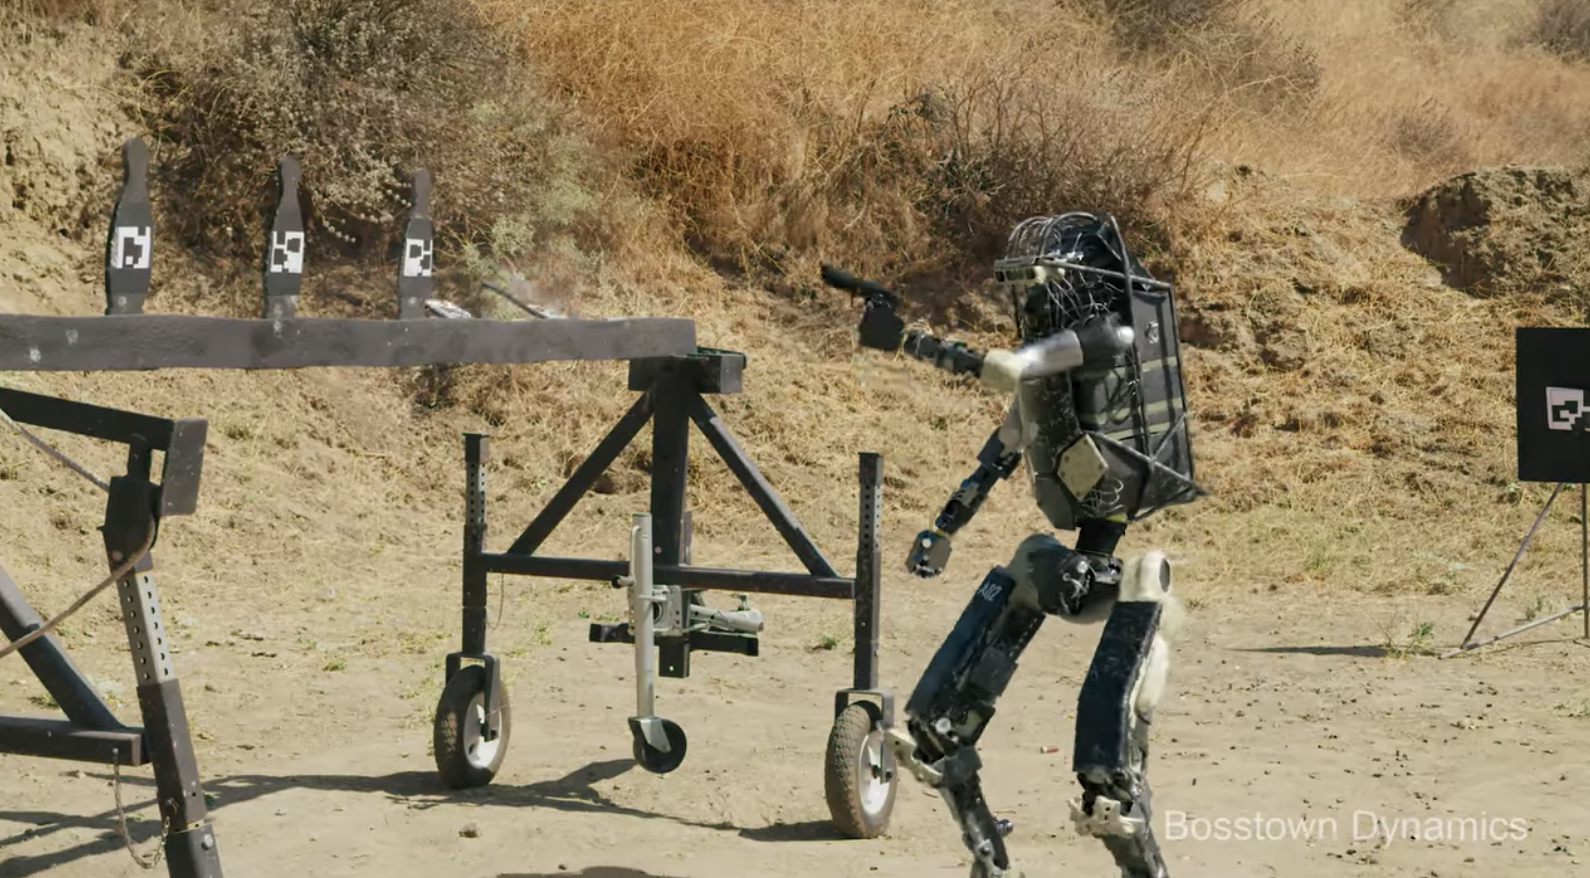 retort supplere Primitiv Robotic Soldiers Are Absolutely Horrifying. Here's the proof.